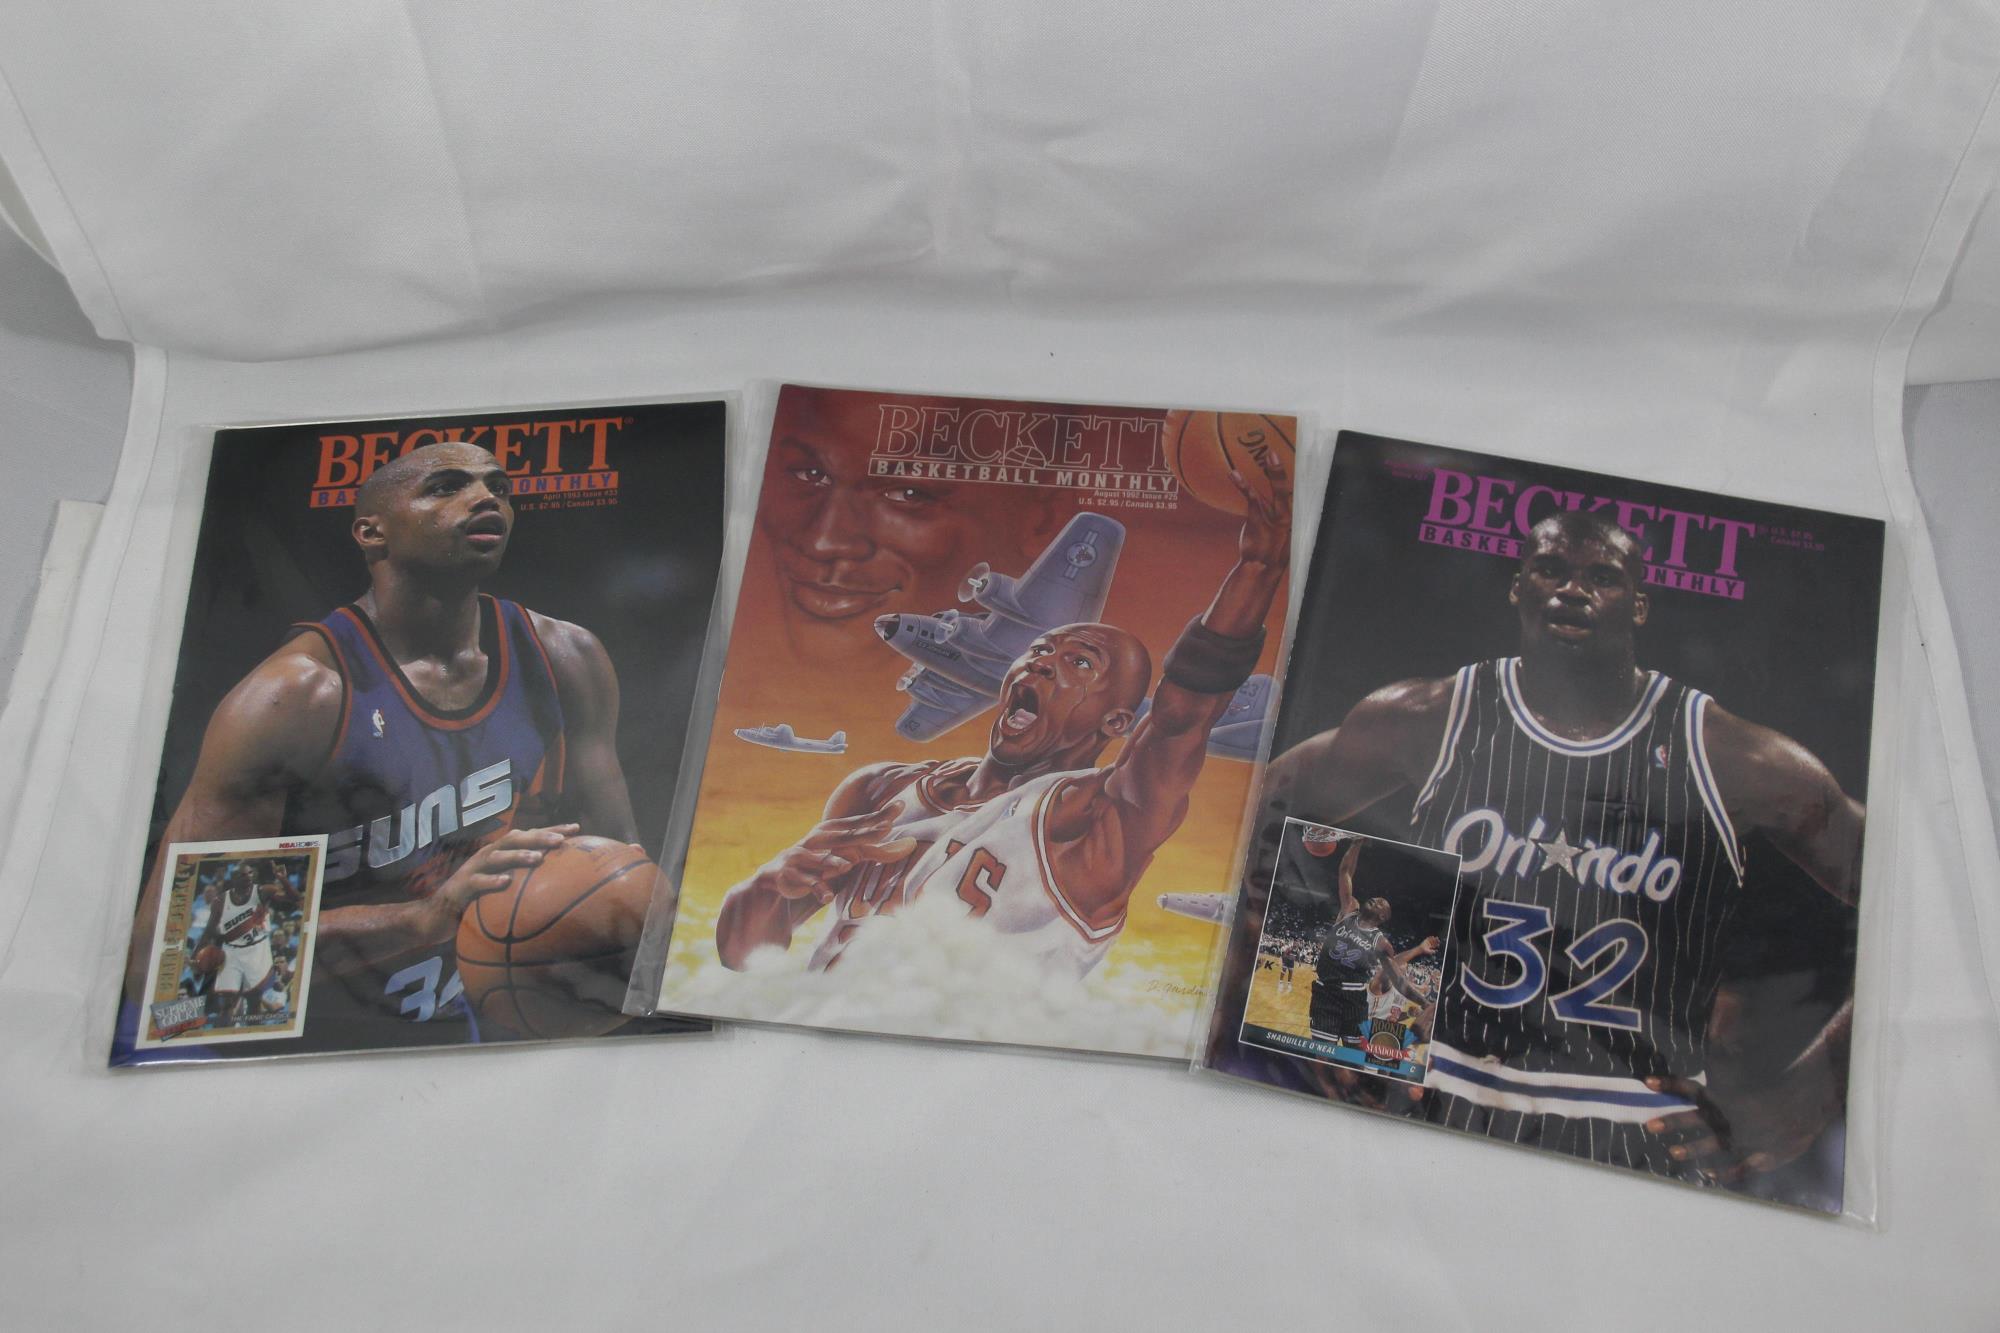 COLLECTION OF 17 BECKETT BASKETBALL MONTHLY